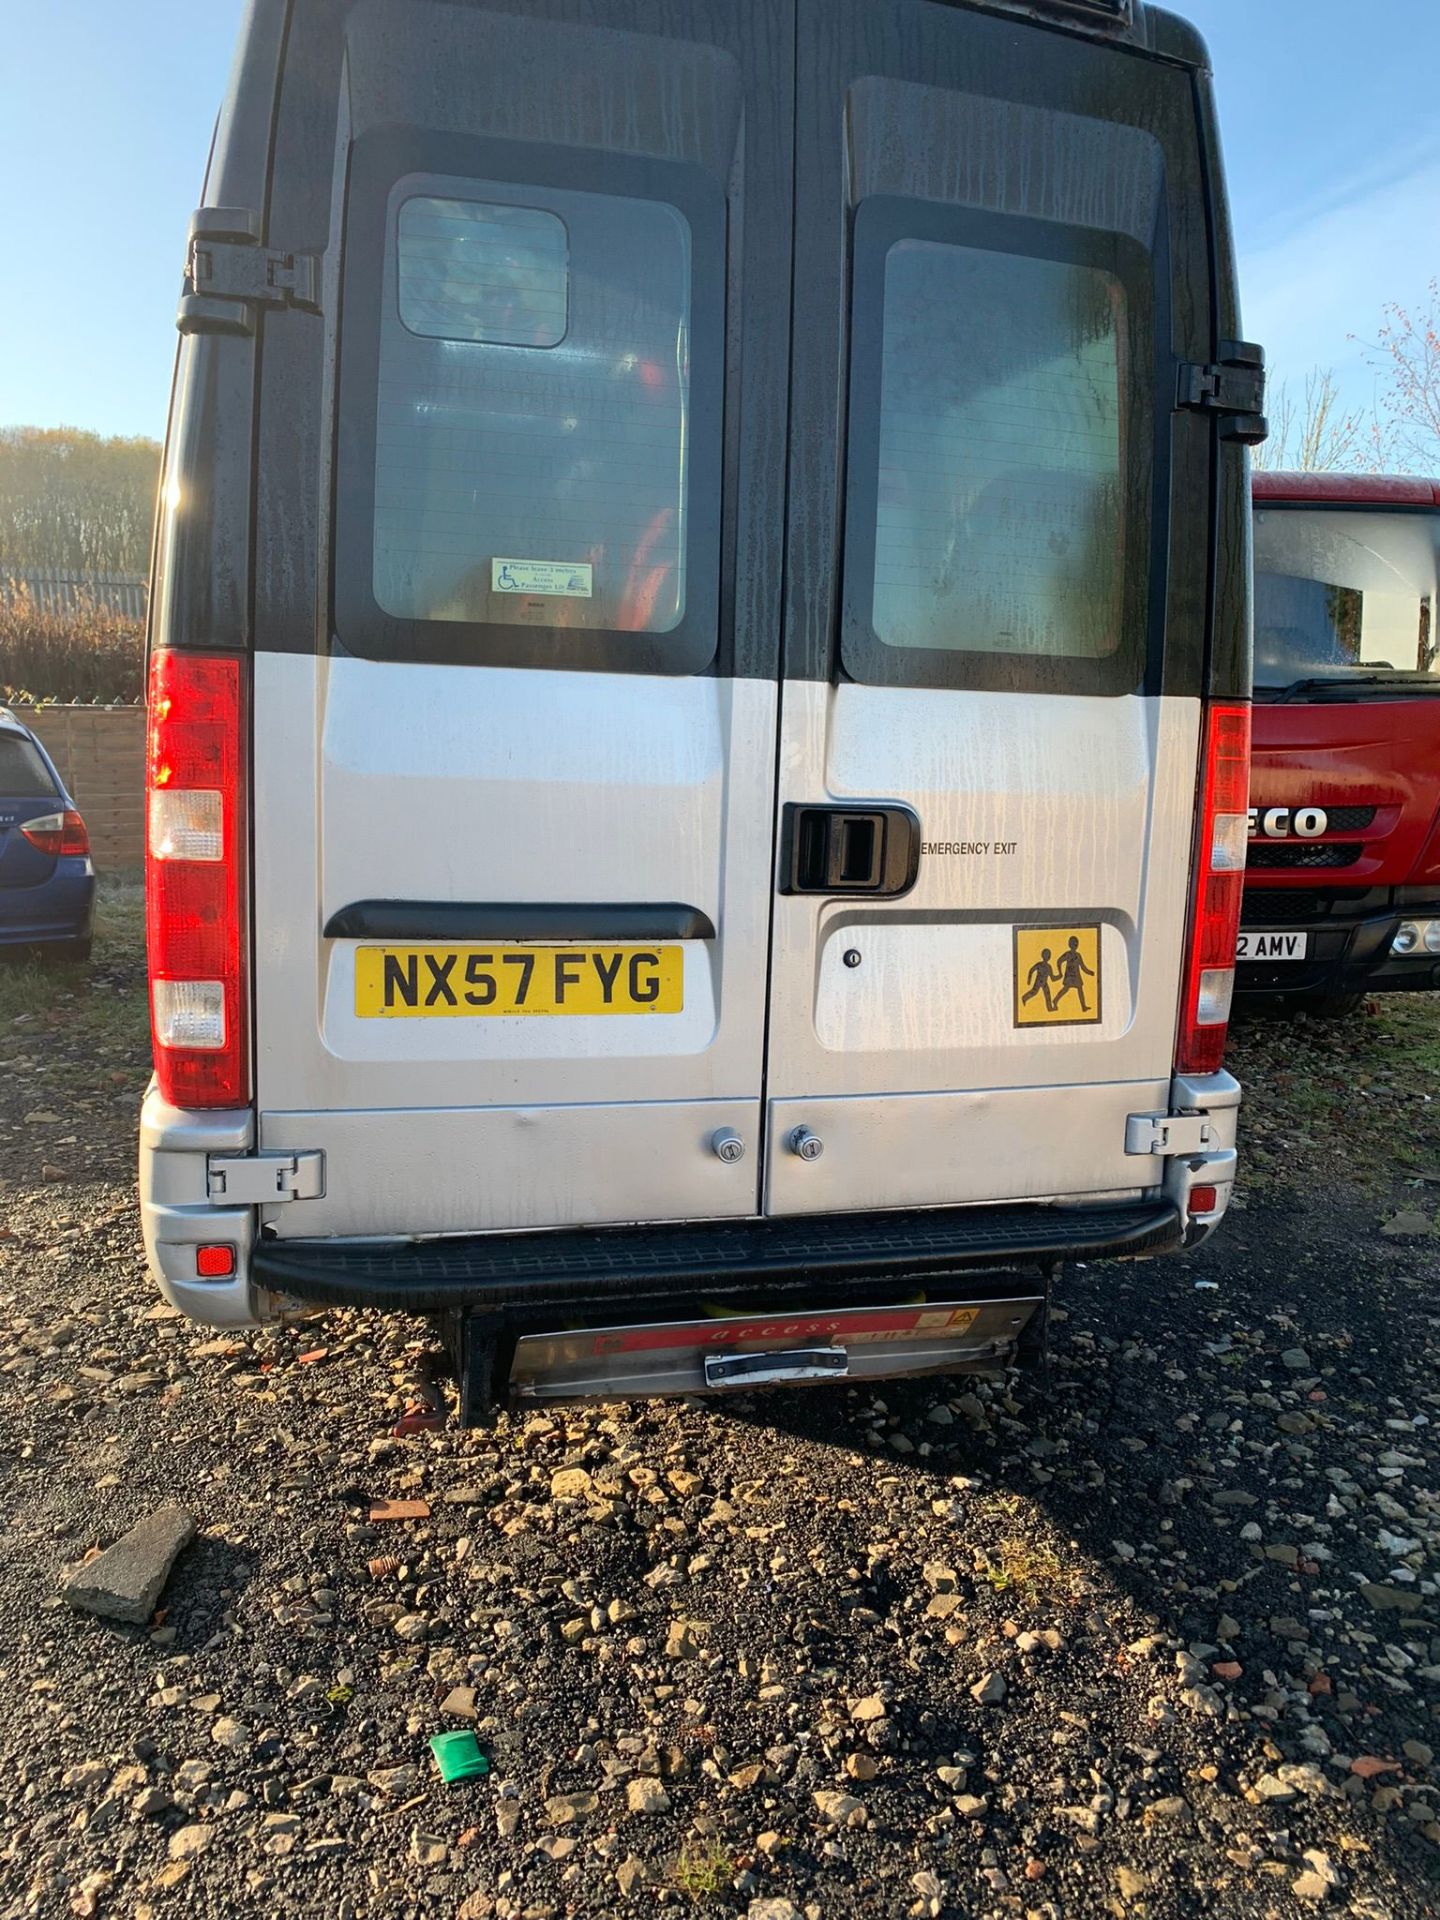 2007 iveco daily iries bus - Image 8 of 11